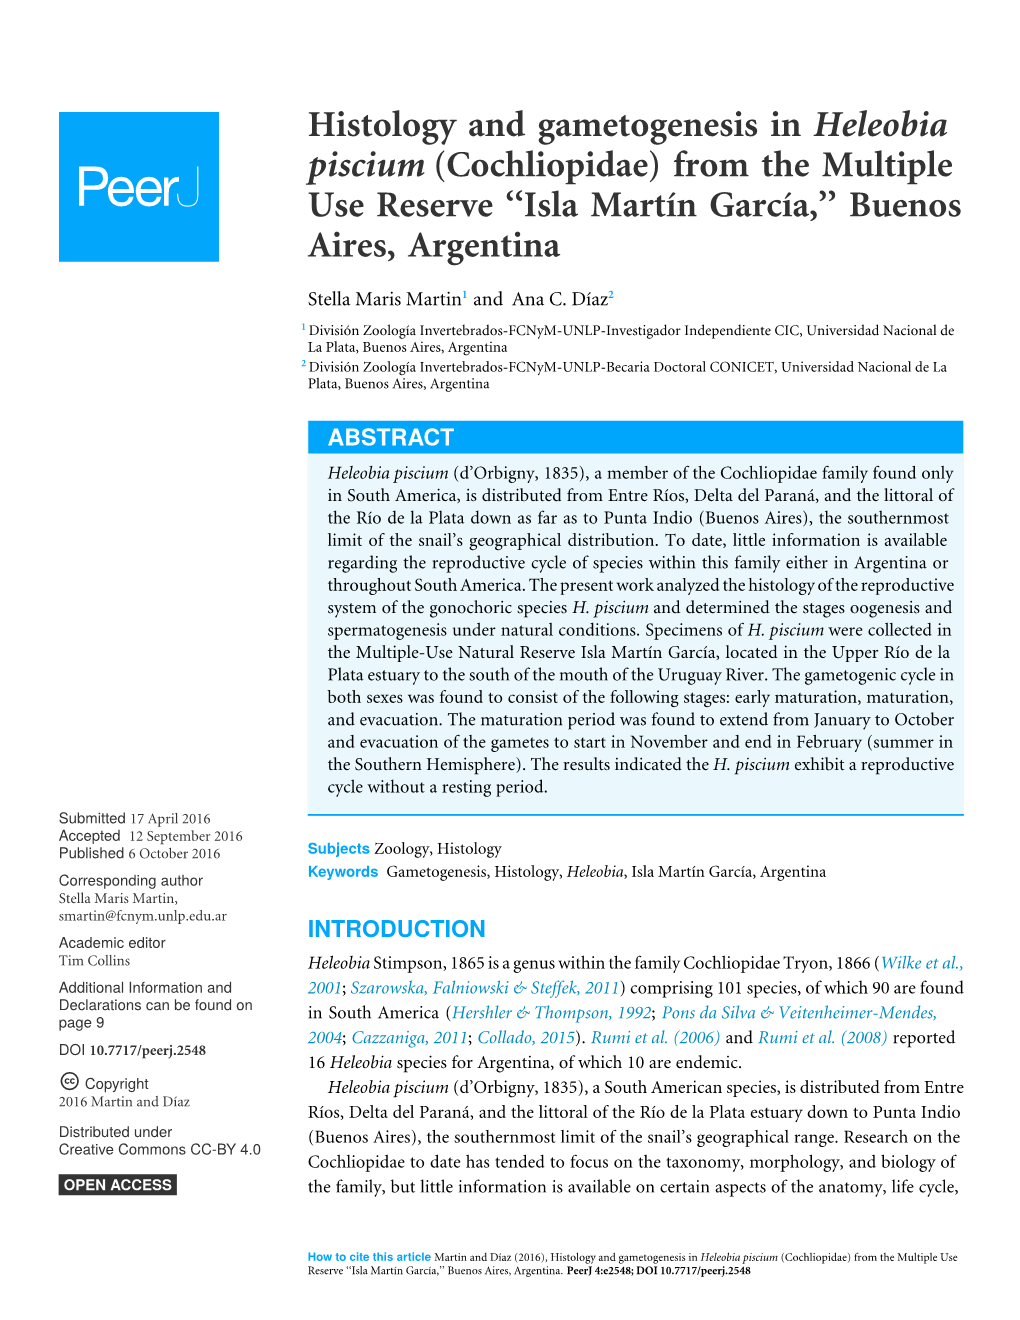 Histology and Gametogenesis in Heleobia Piscium (Cochliopidae) from the Multiple Use Reserve ‘‘Isla Martín García,’’ Buenos Aires, Argentina